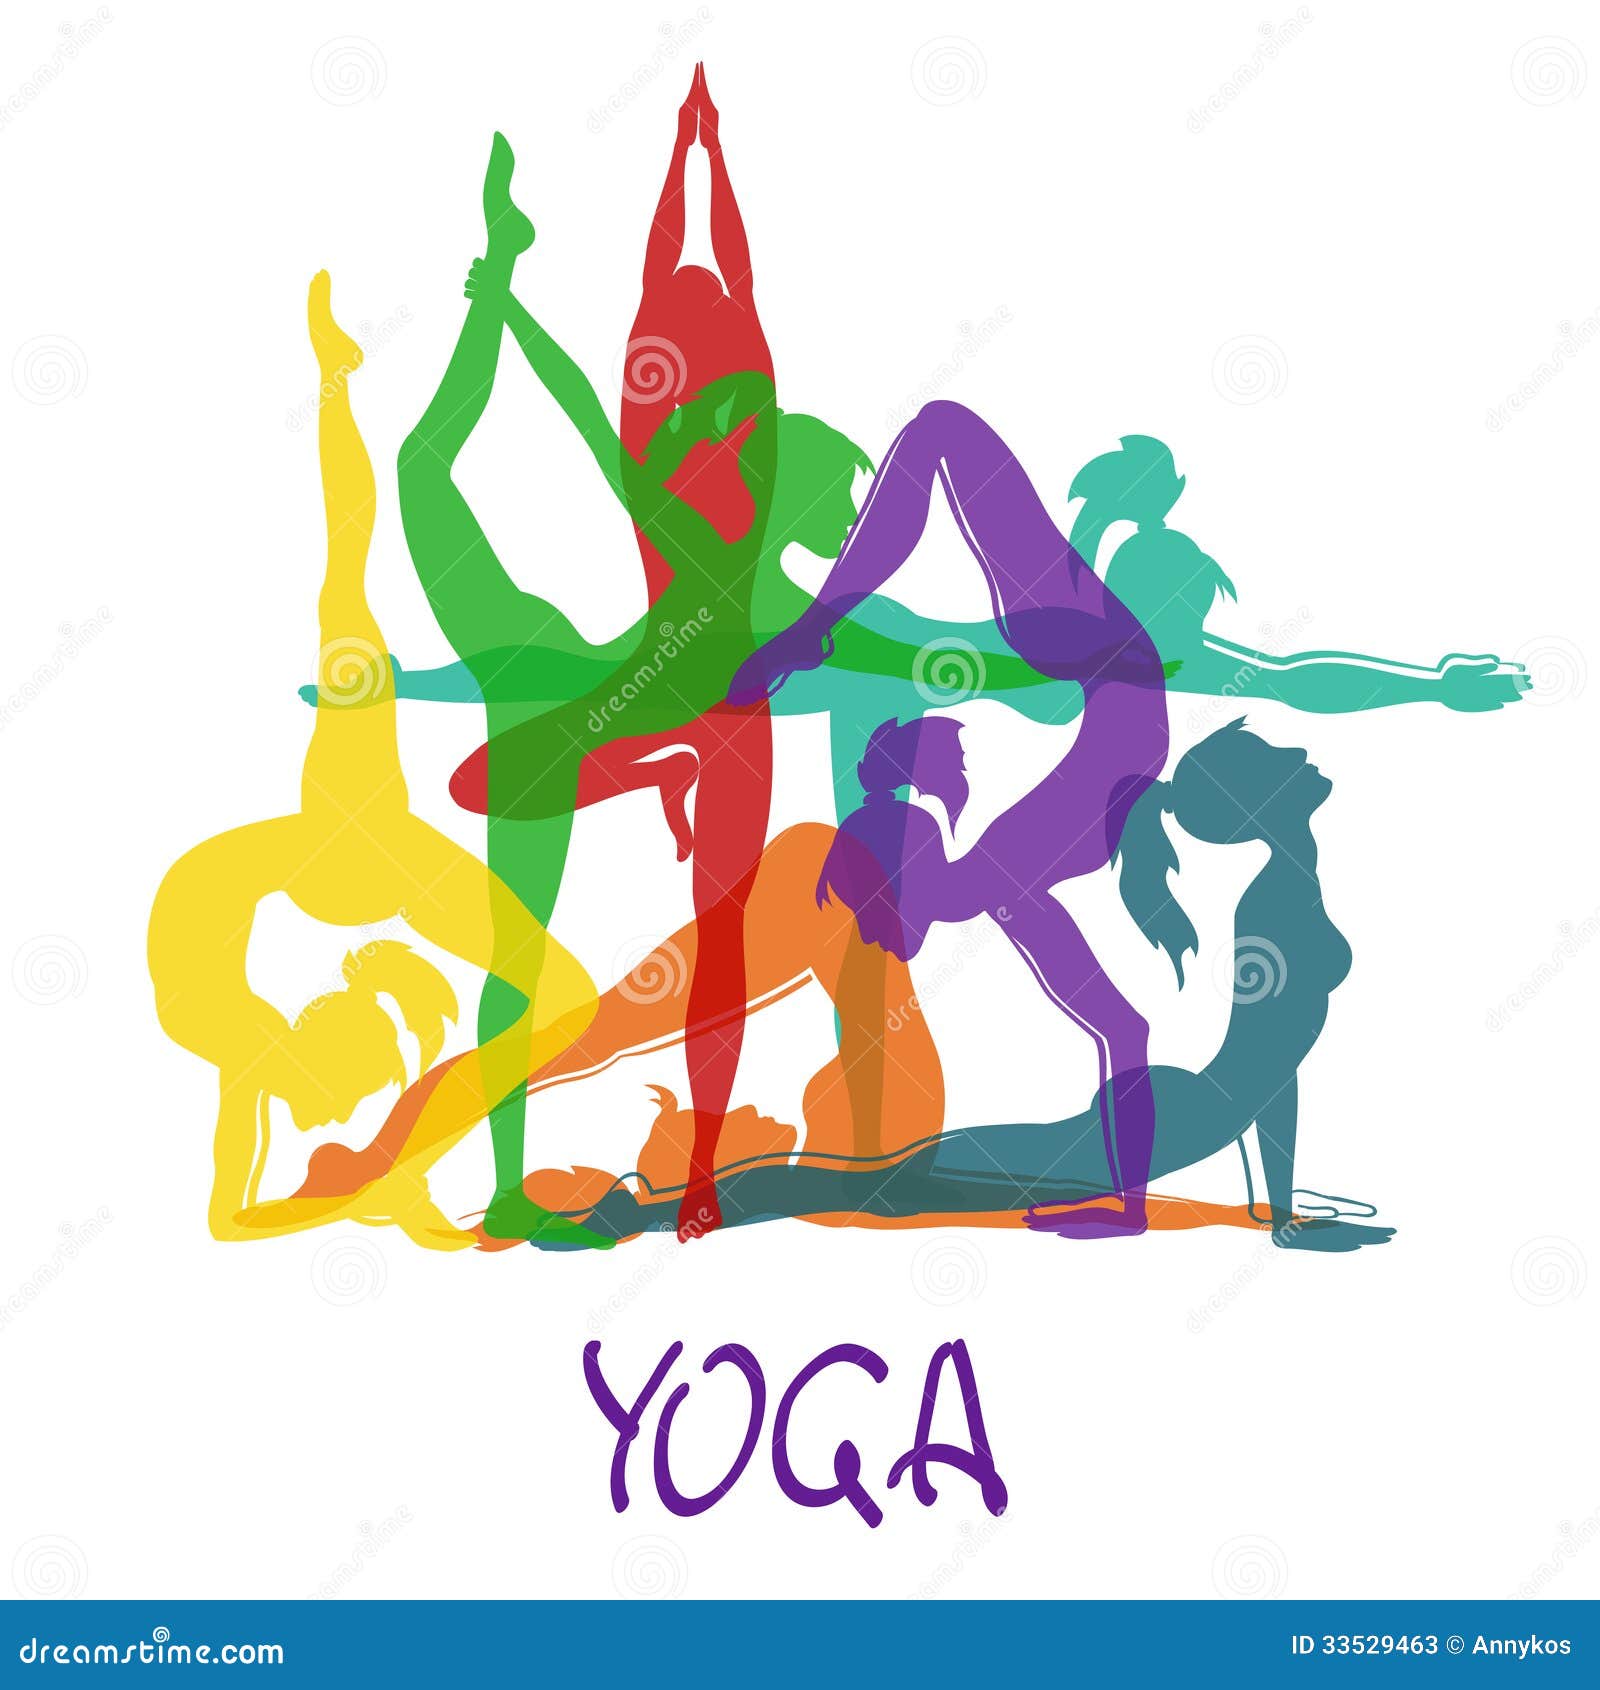 clipart images of yoga poses - photo #38